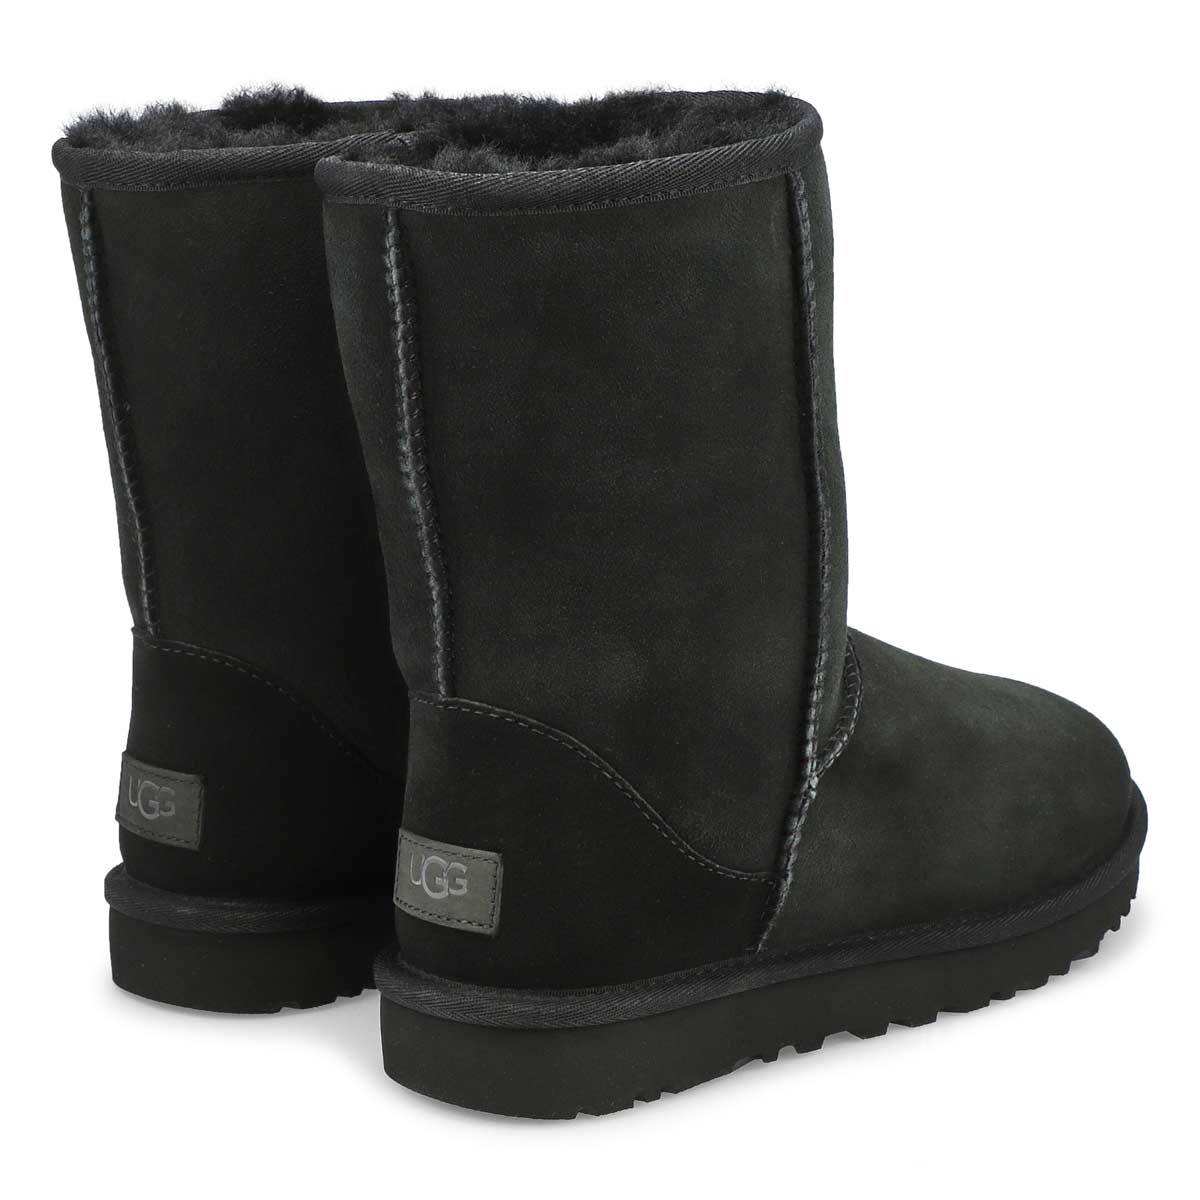 UGG - Black Boots w/ Reinforced Toes (5) - www.living.com.uy